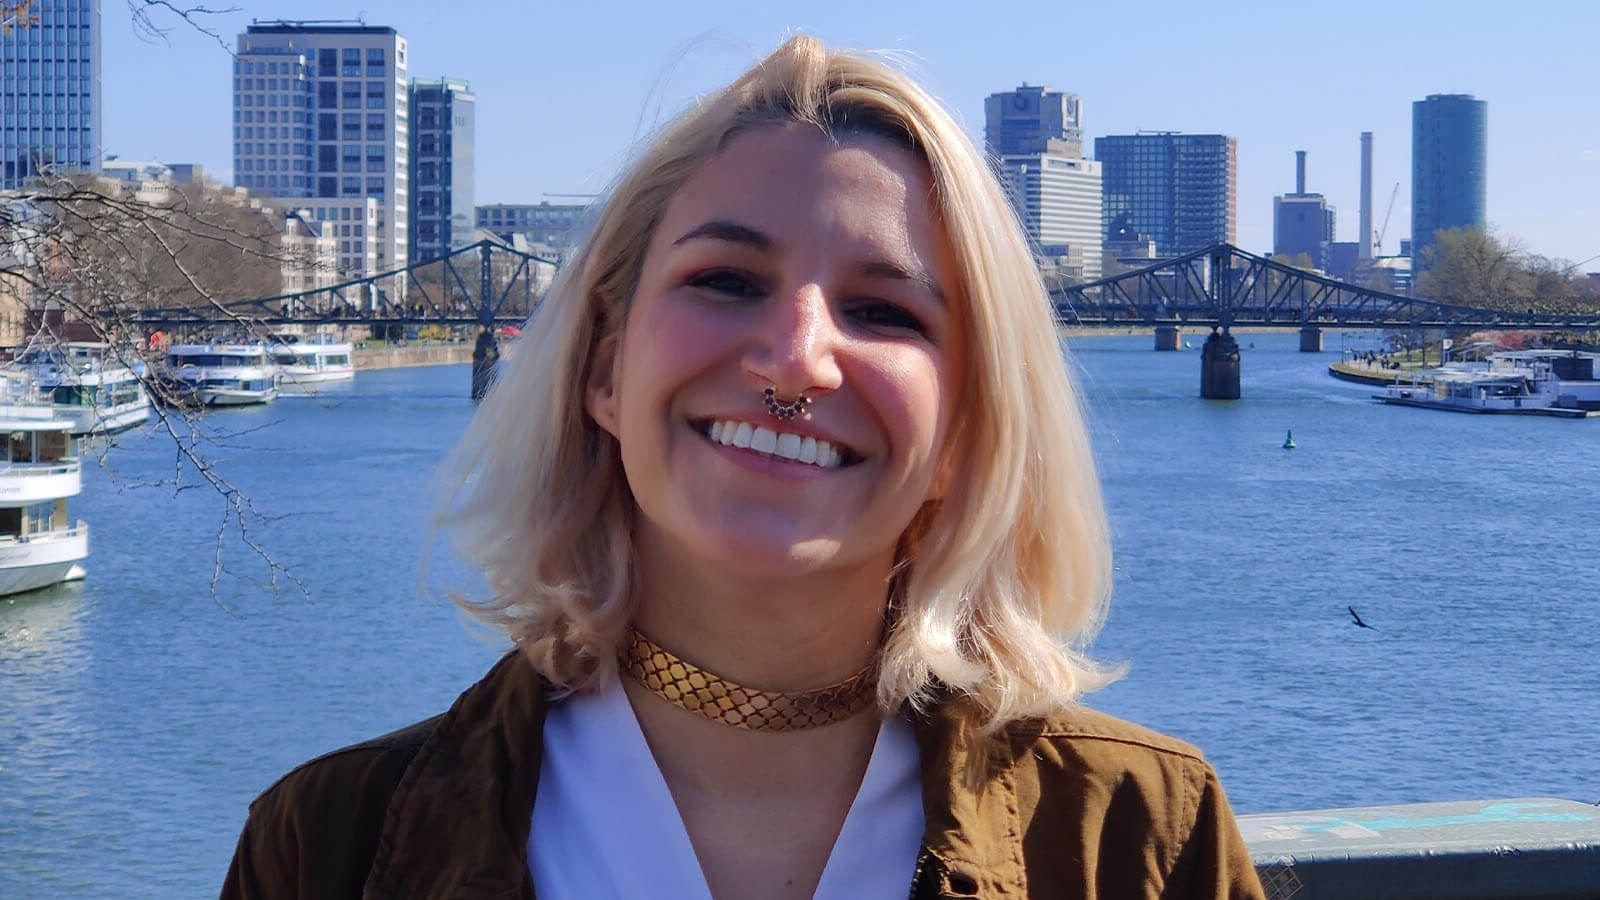 Grad Angela Decastro, a woman with shoulder-length blonde hair wearing a brown jacket and white top, smiles while standing on a bridge overlooking a river, in the distance behind her is a bridge and cityscape.